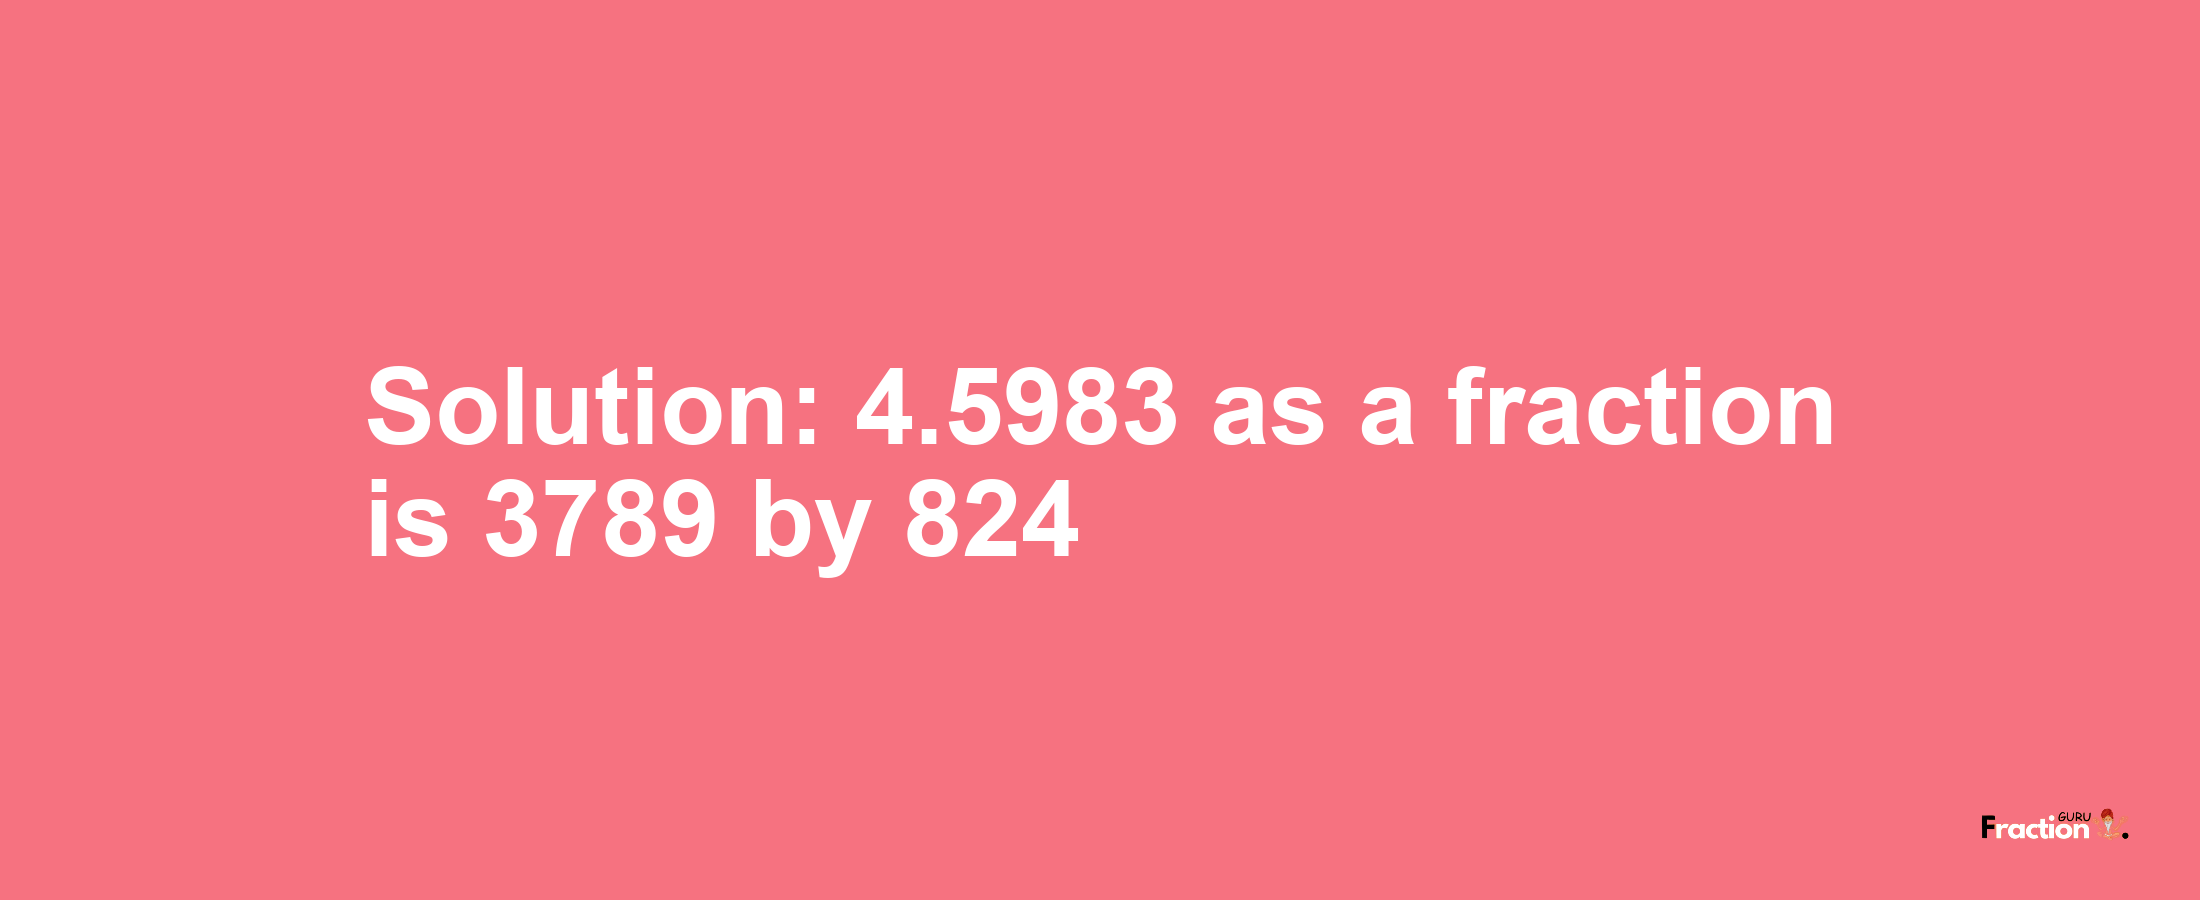 Solution:4.5983 as a fraction is 3789/824